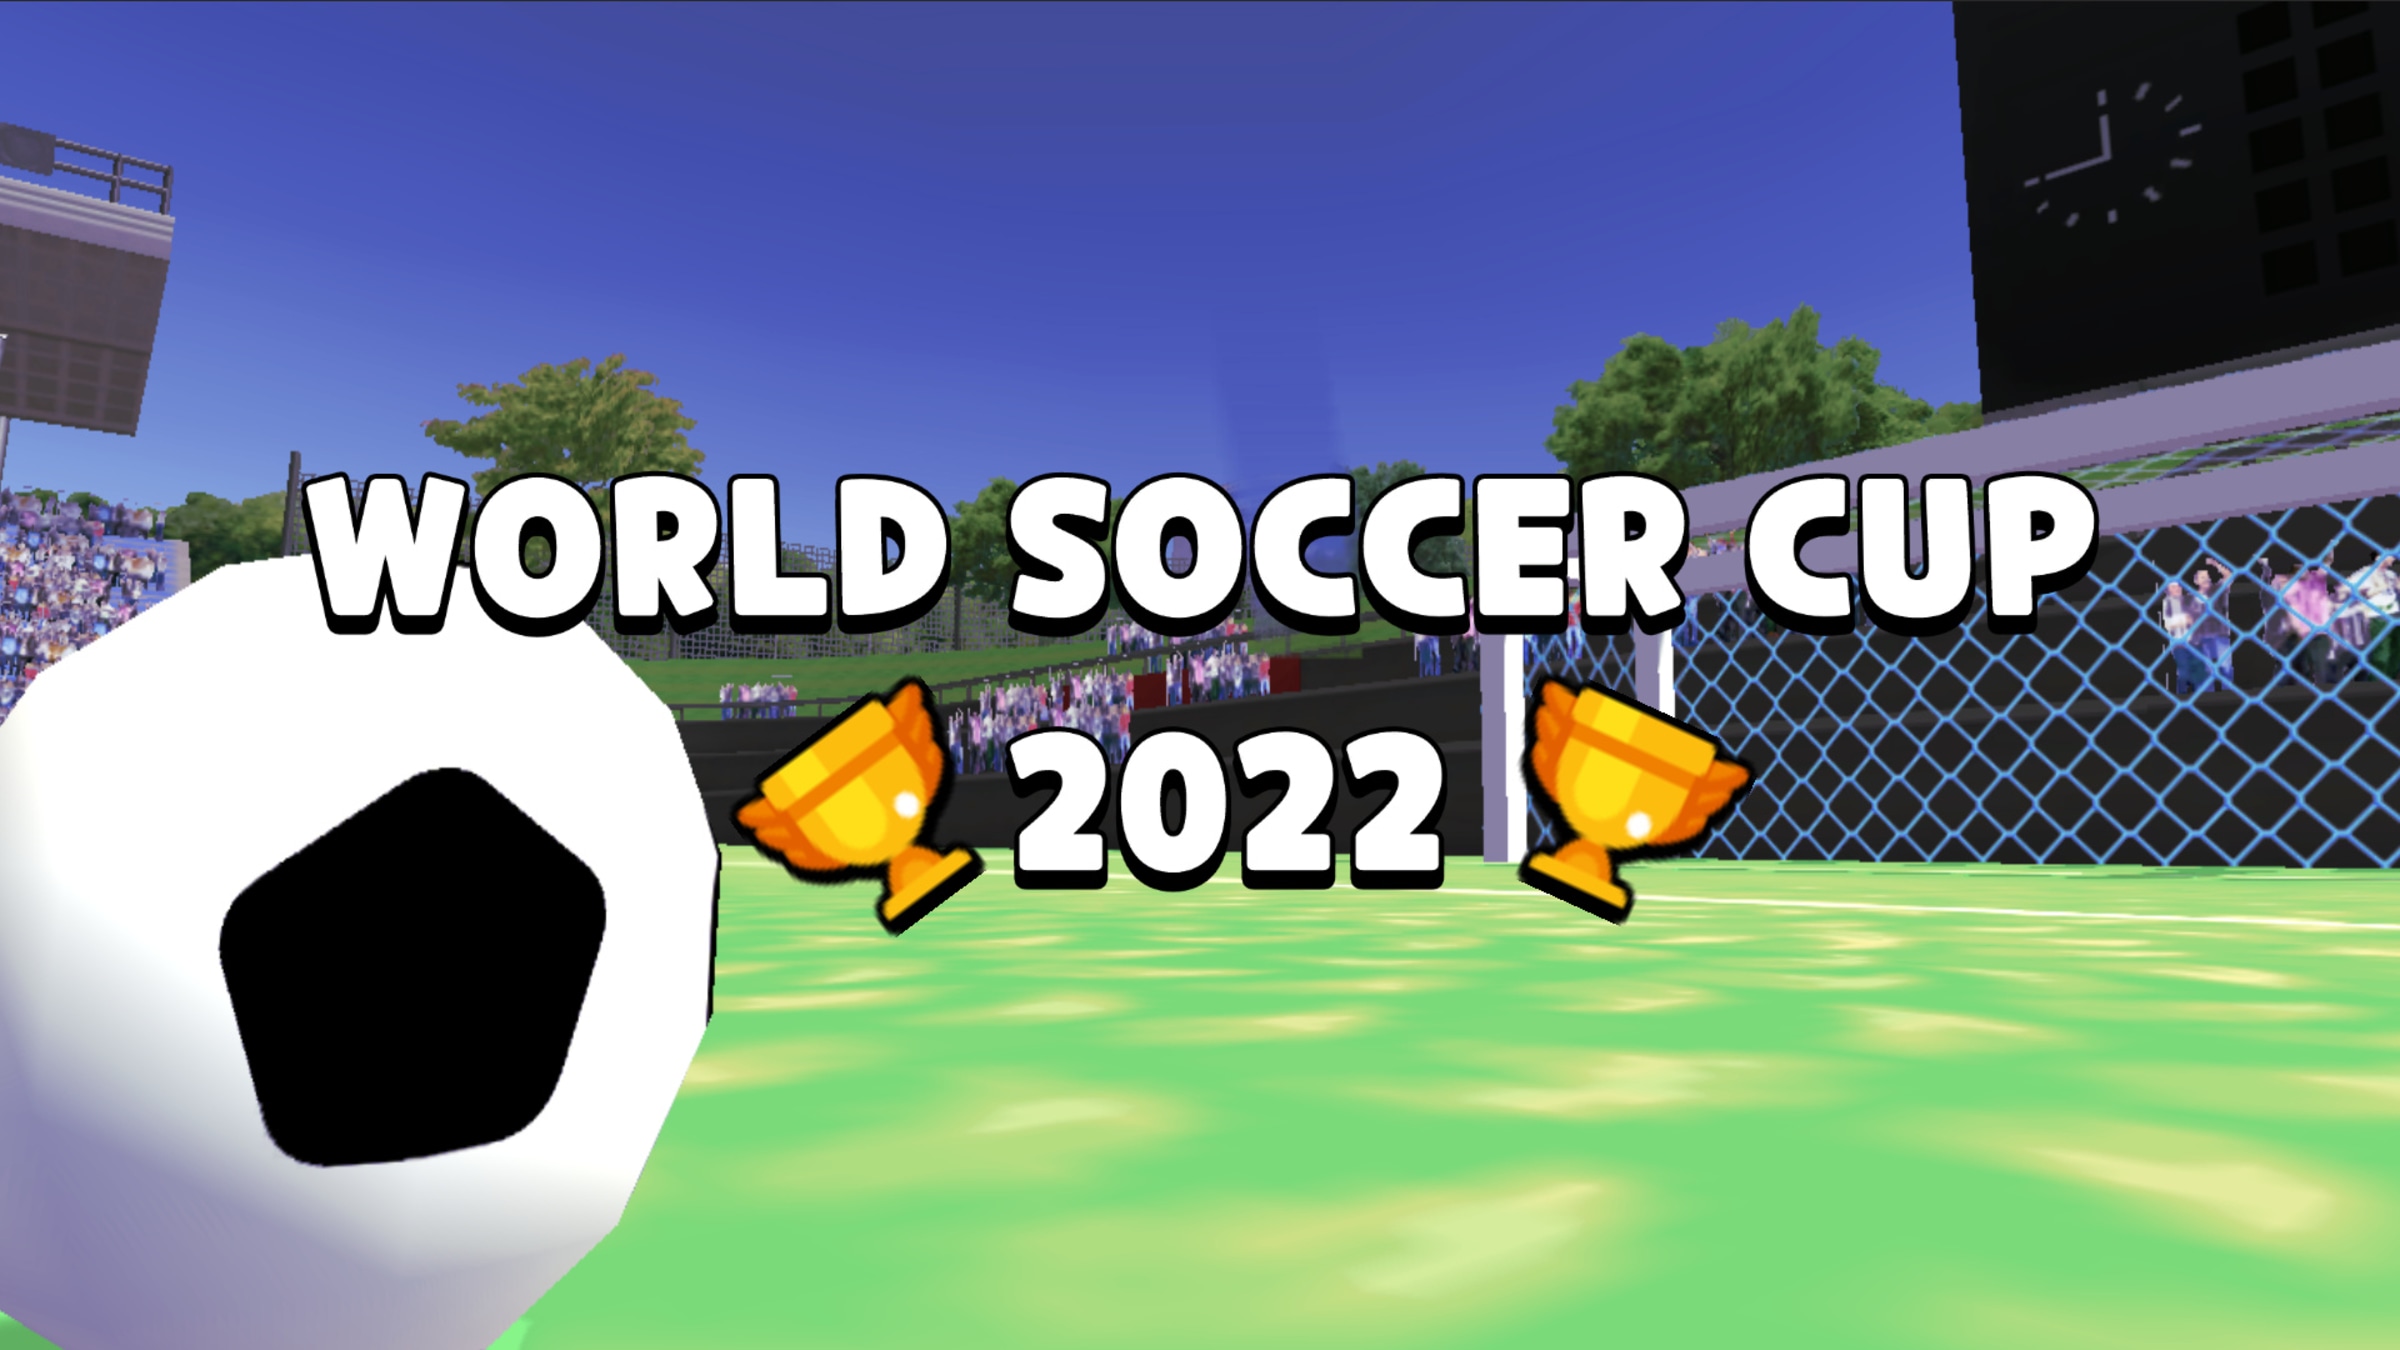 World Soccer Cup 2022 for Nintendo Switch